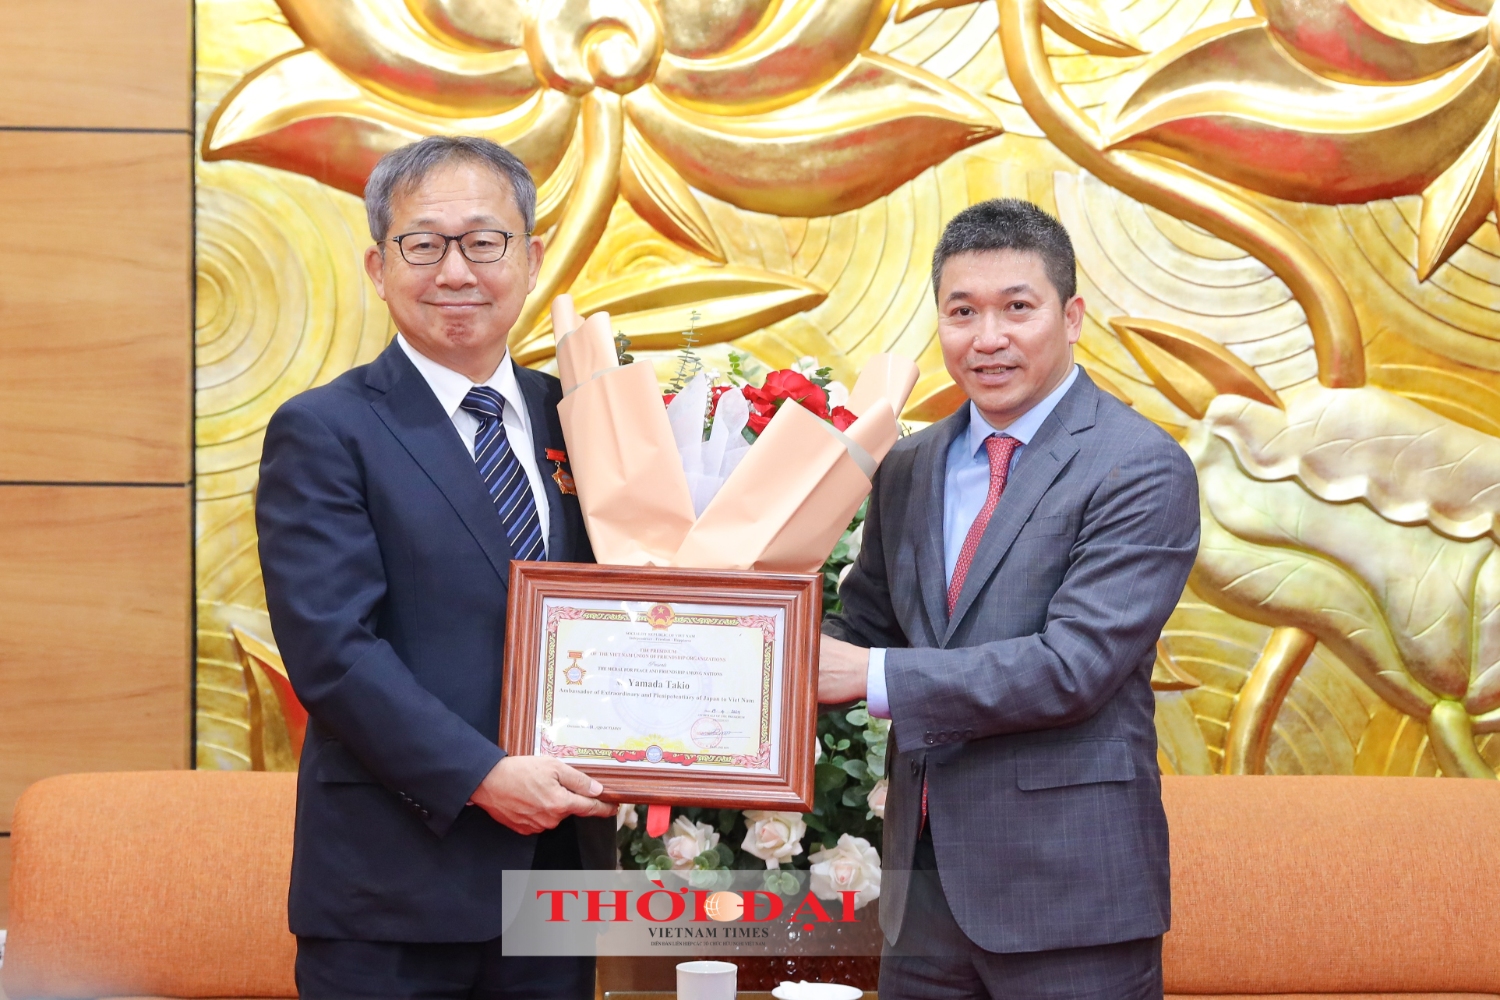 Phan Anh Son (R), President of the Viet Nam Union of Friendship Organizations, awarded the Medal "For Peace and Friendship among Nations" to Ambassador Yamada Takio. (Photo: Dinh Hoa)